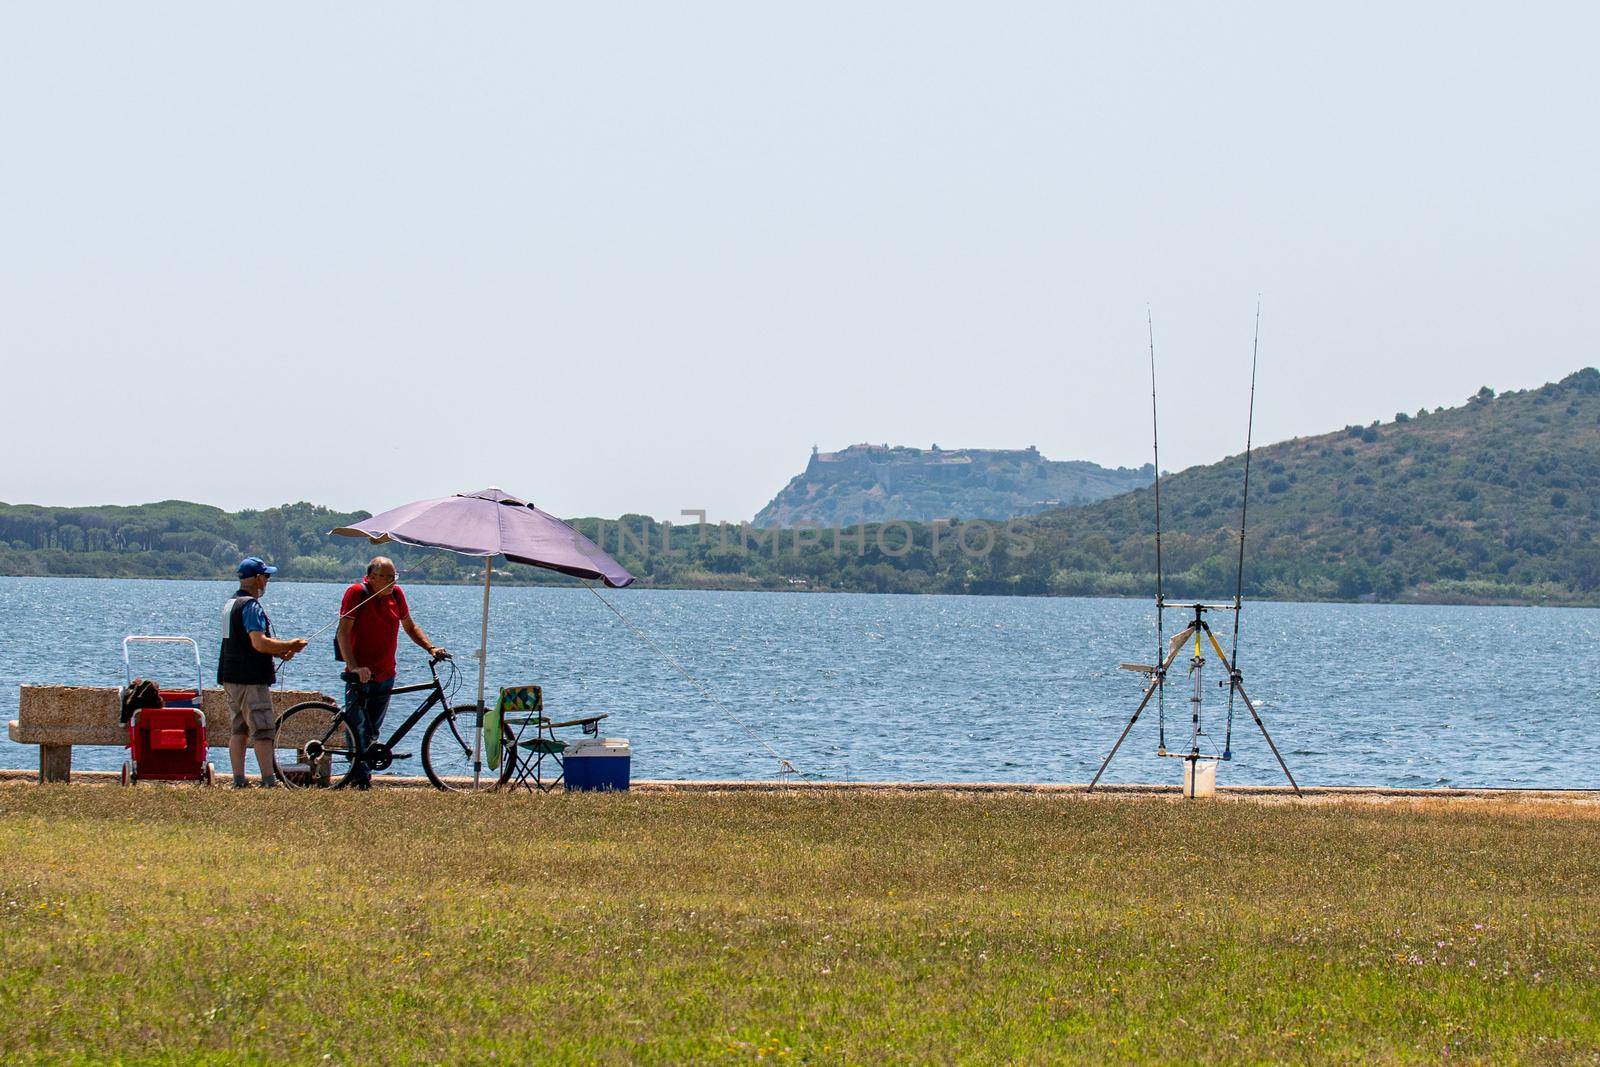 orbetello,italy july 24 2021:fisherman on the shores of the sea in Orbetello